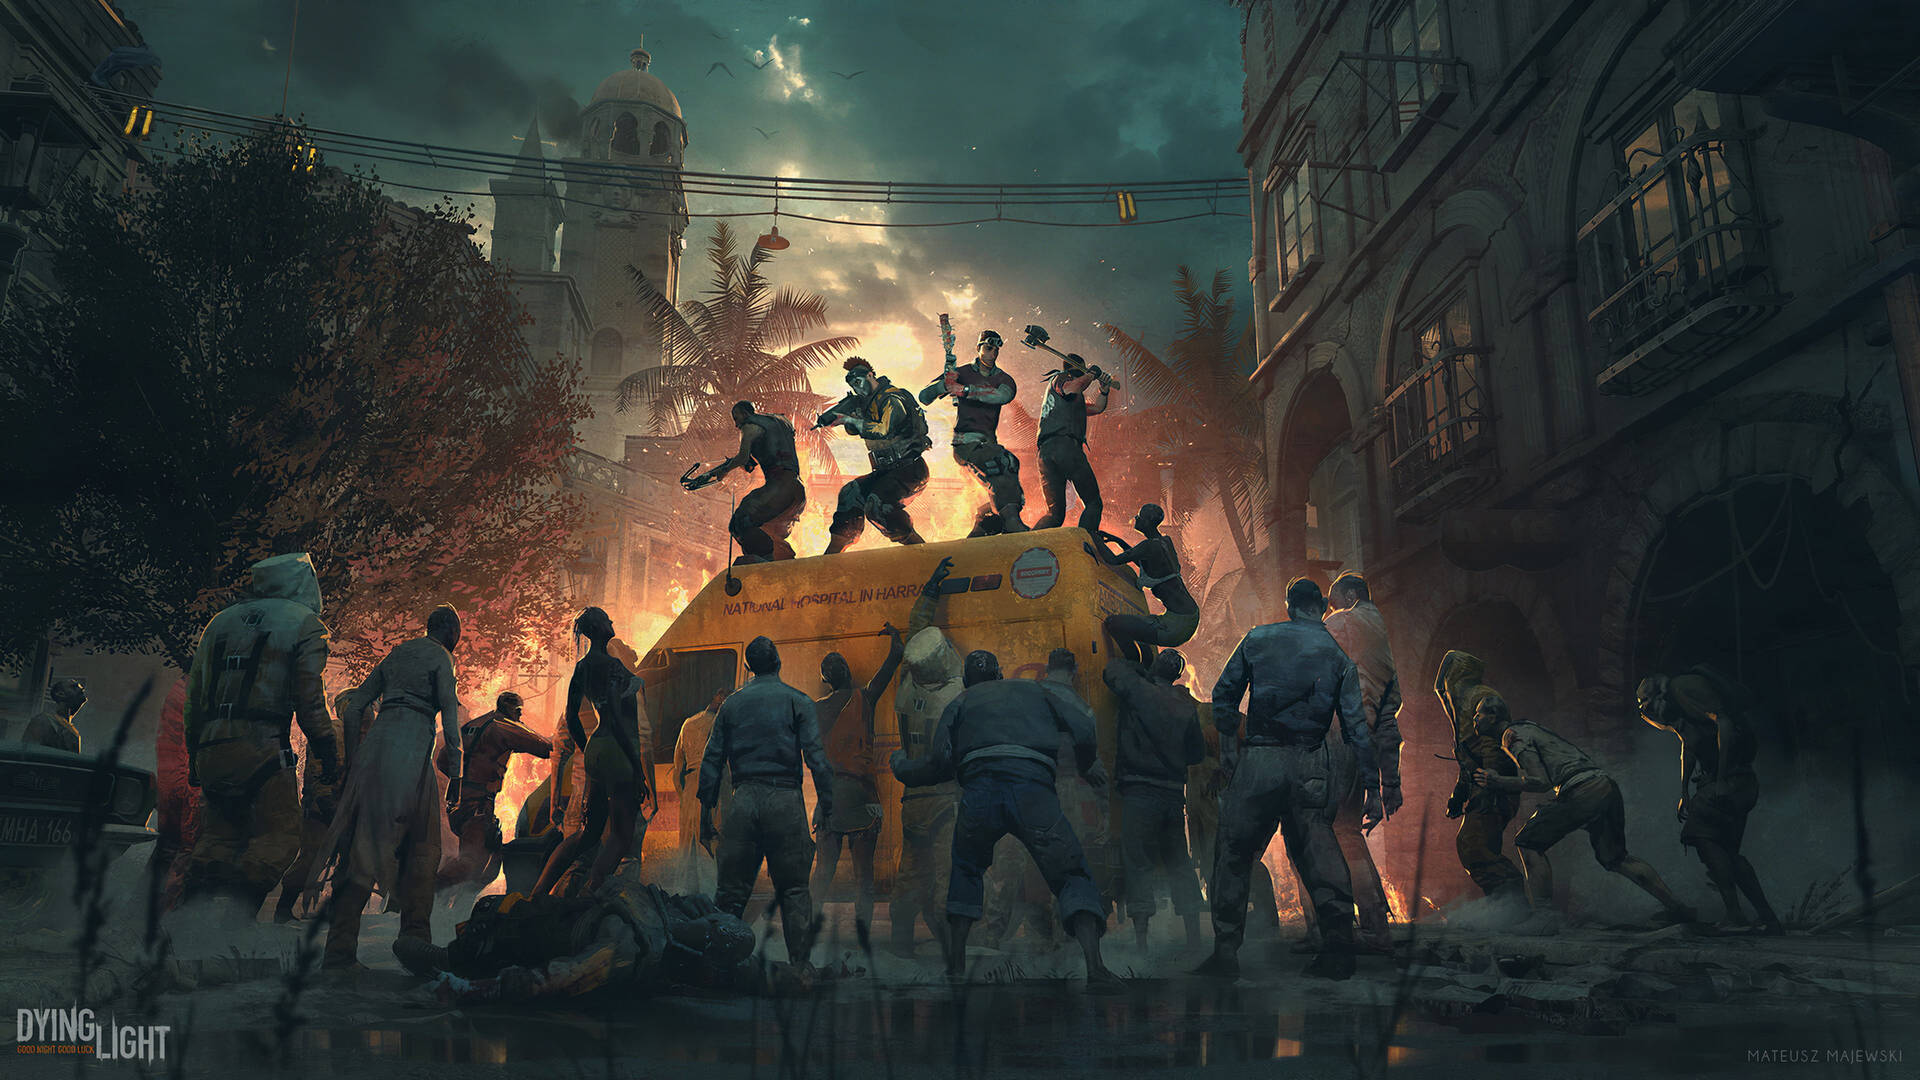 Caption: Thrilling Encounter in Dying Light 2 Cityscape Wallpaper